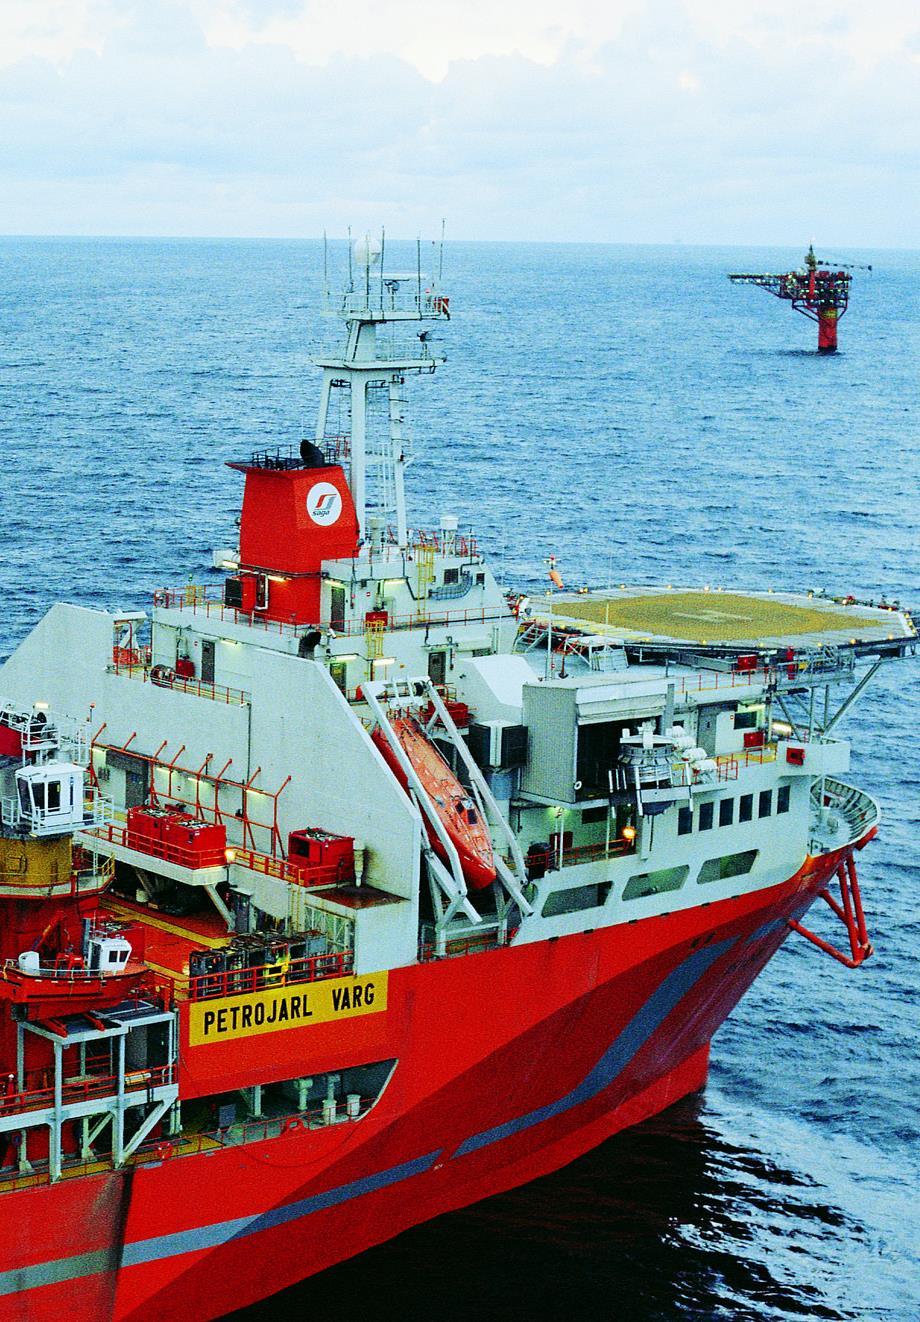 FPSO / FSO Charter Updates In March 2017, commenced a 6- month FEED study with Alpha Petroleum Resources Limited, for the Petrojarl Varg FPSO unit on the Cheviot field in the U.K.